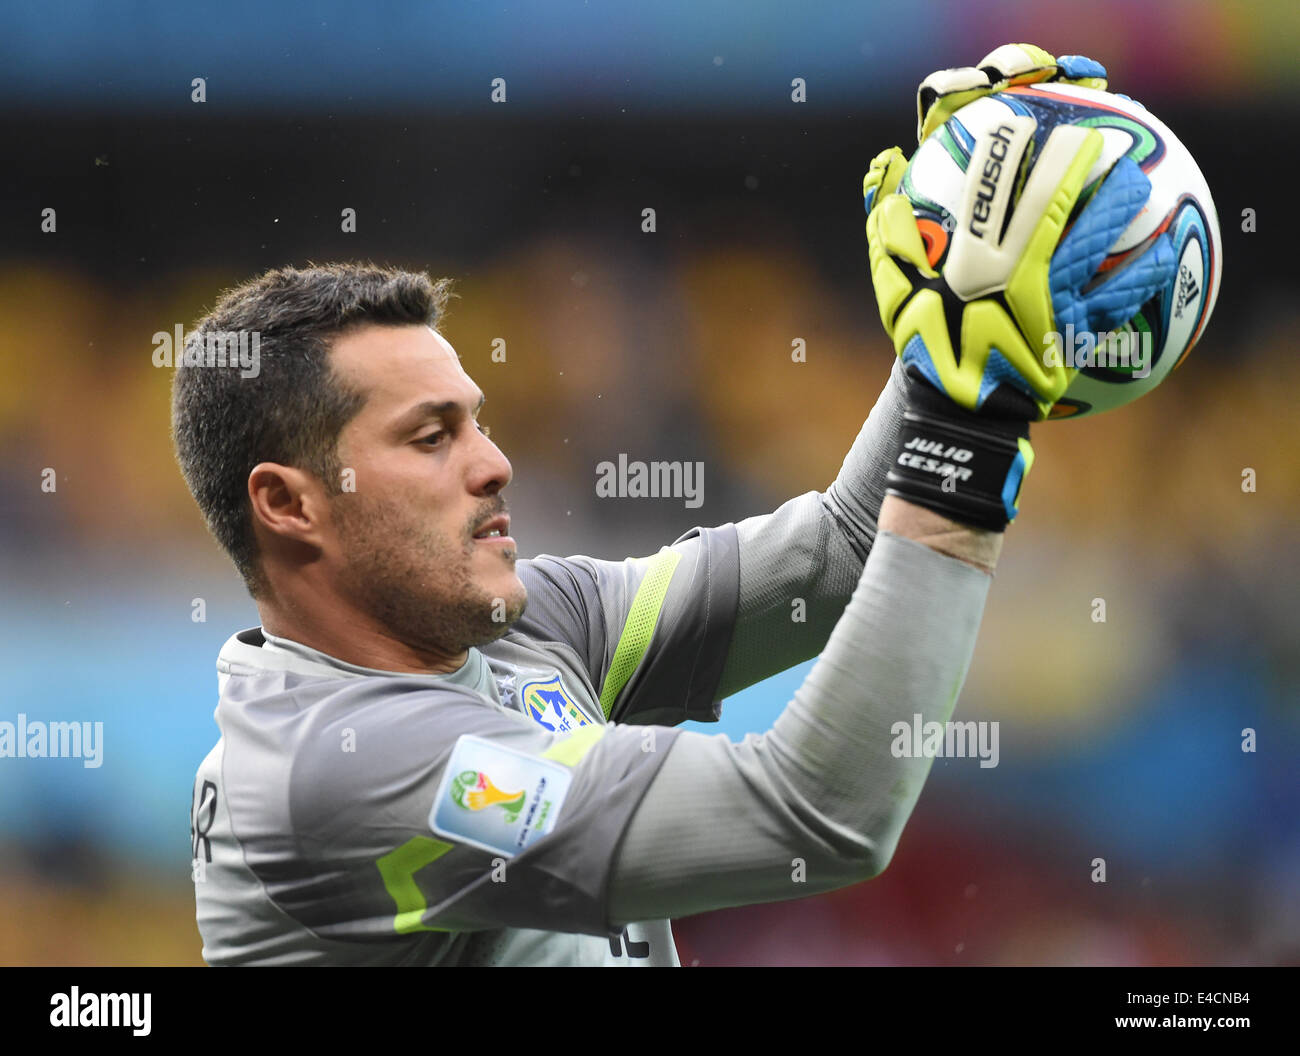 Belo Horizonte, Brazil. 08th July, 2014. Brazil's goalkeeper Julio Cesar in action during the FIFA World Cup 2014 semi-final soccer match between Brazil and Germany at Estadio Mineirao in Belo Horizonte, Brazil, 08 July 2014. Photo: Marcus Brandt/dpa/Alamy Live News Stock Photo